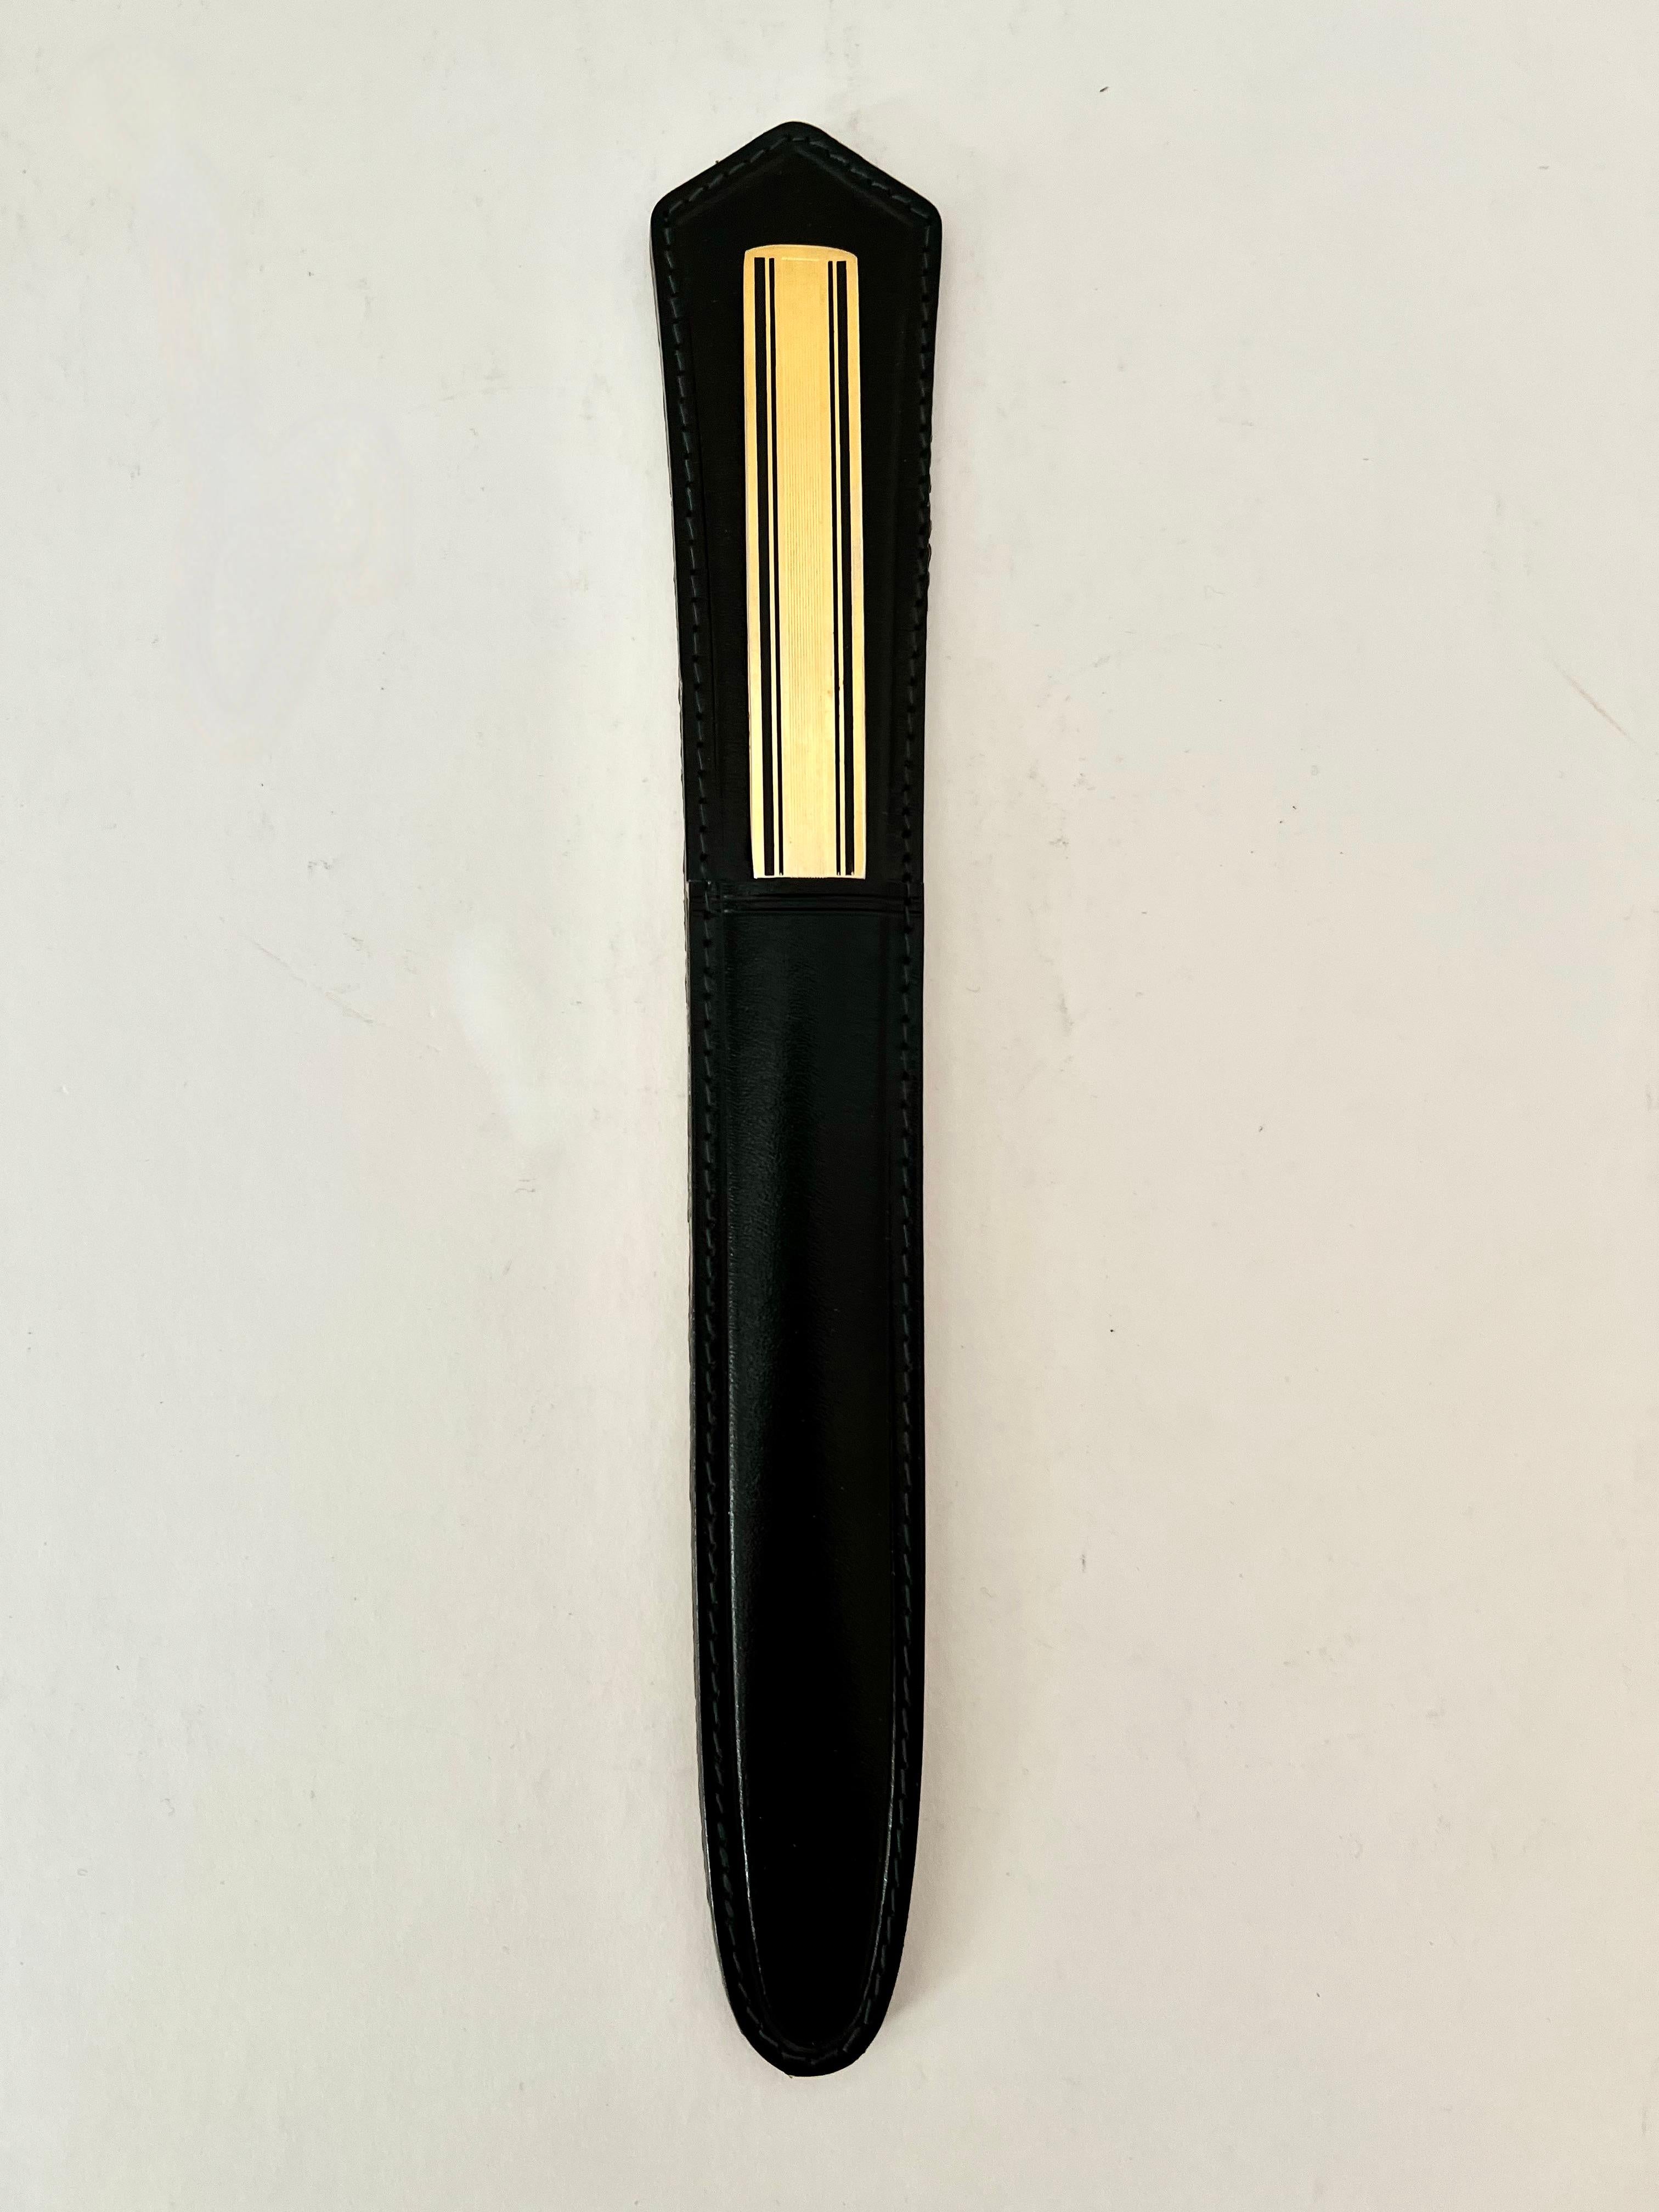 Solid Brass Letter opener with leather case. The brass letter opener has a matte finish with black line details and fits nicely in its case when not in use. 

Made in Germany, the pair are a compliment to any desk or work station and are